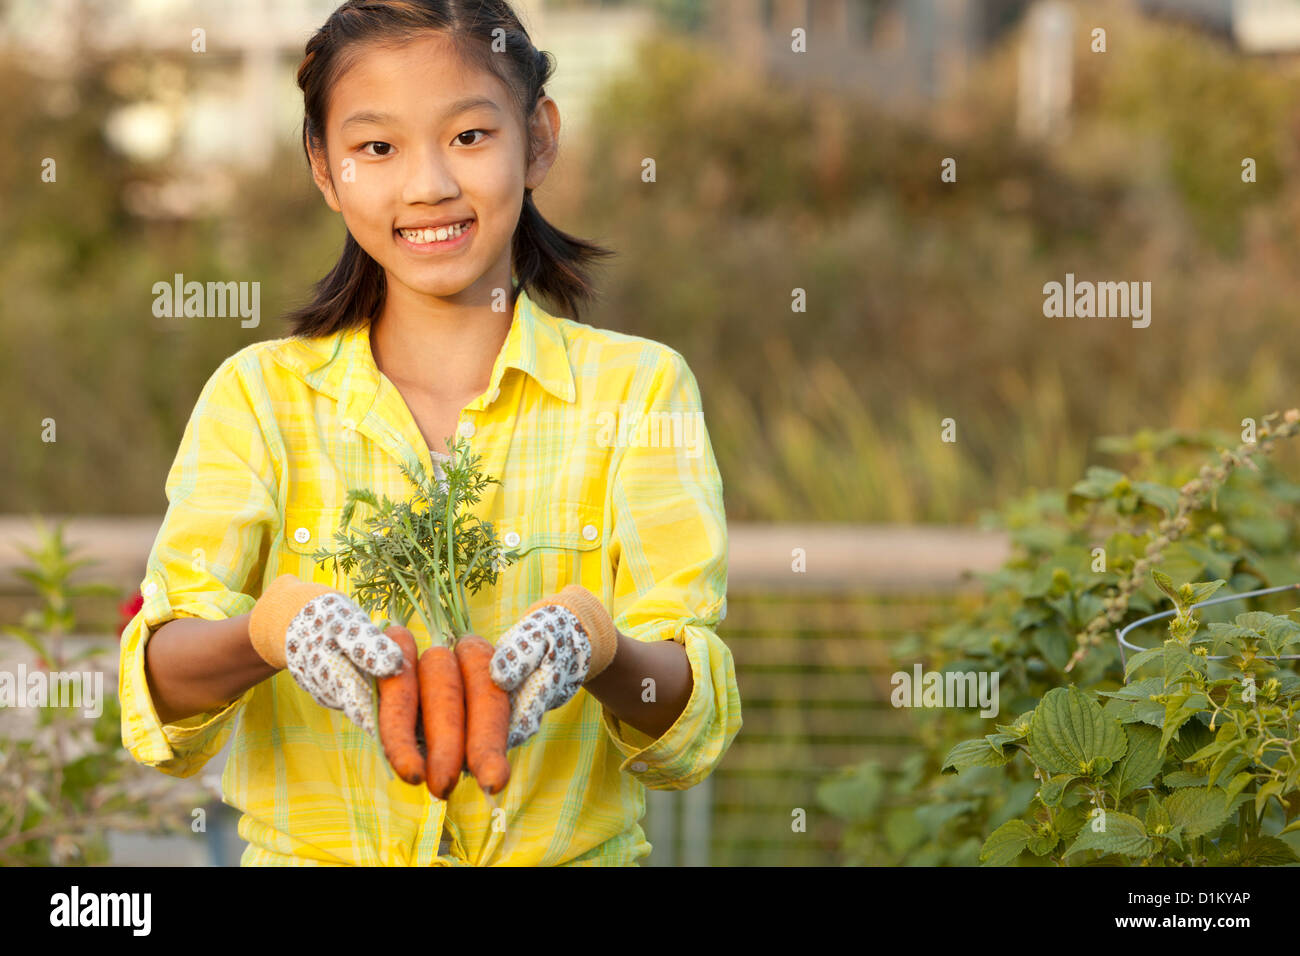 Japanese girl holding bunch of carrots Stock Photo